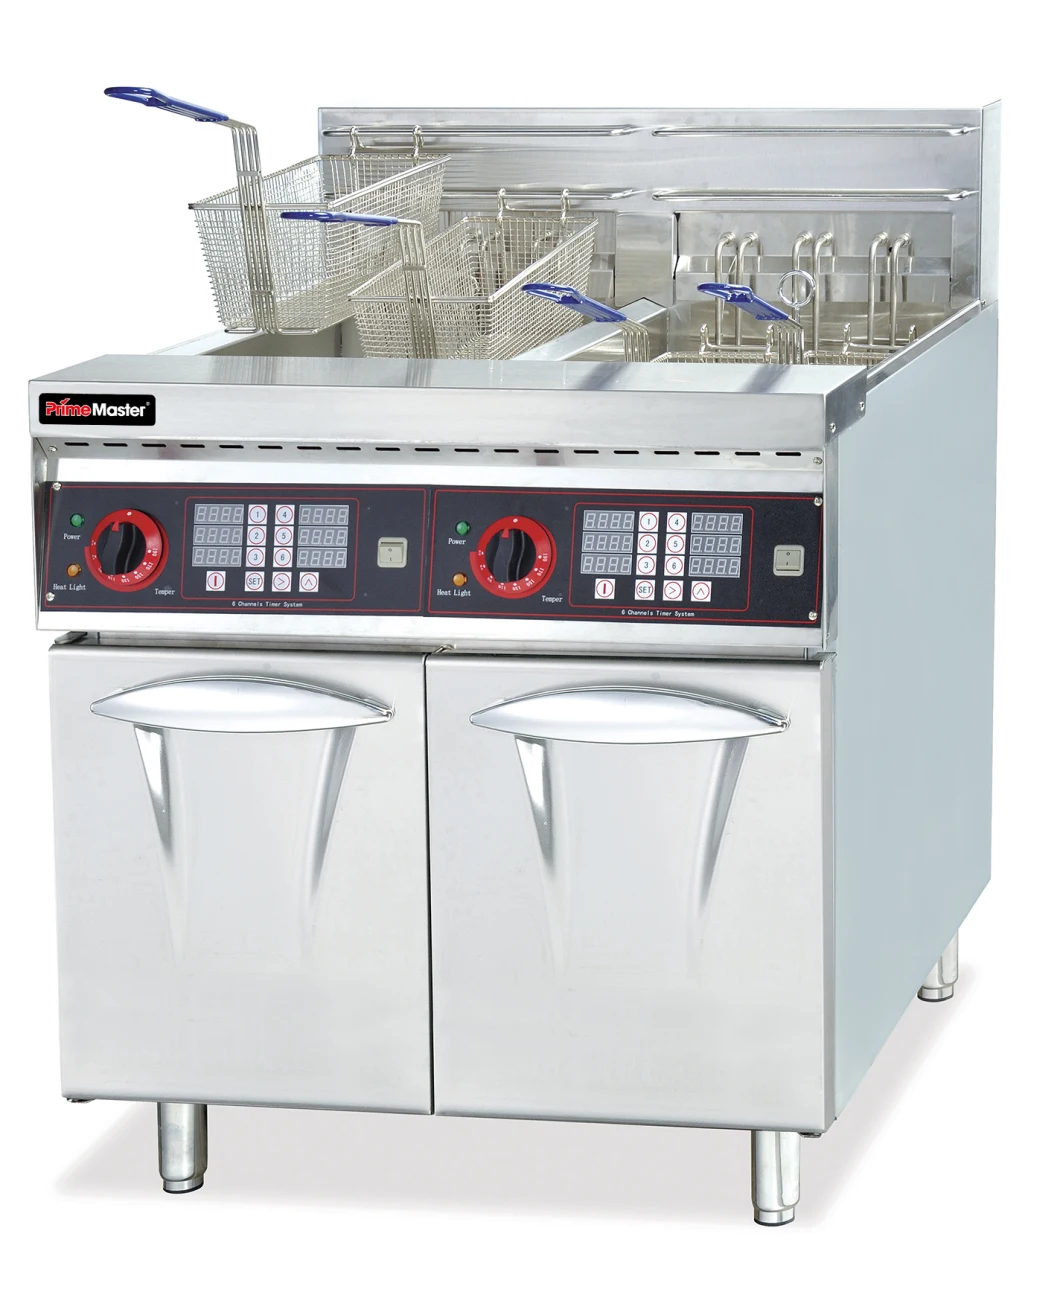 Free Standing Commercial Kitchen Equipment Electric Fryer with Cabinet Commercial All Flat Fryer for Meat and Food French Fire Double Tank 4 Basket with Timer